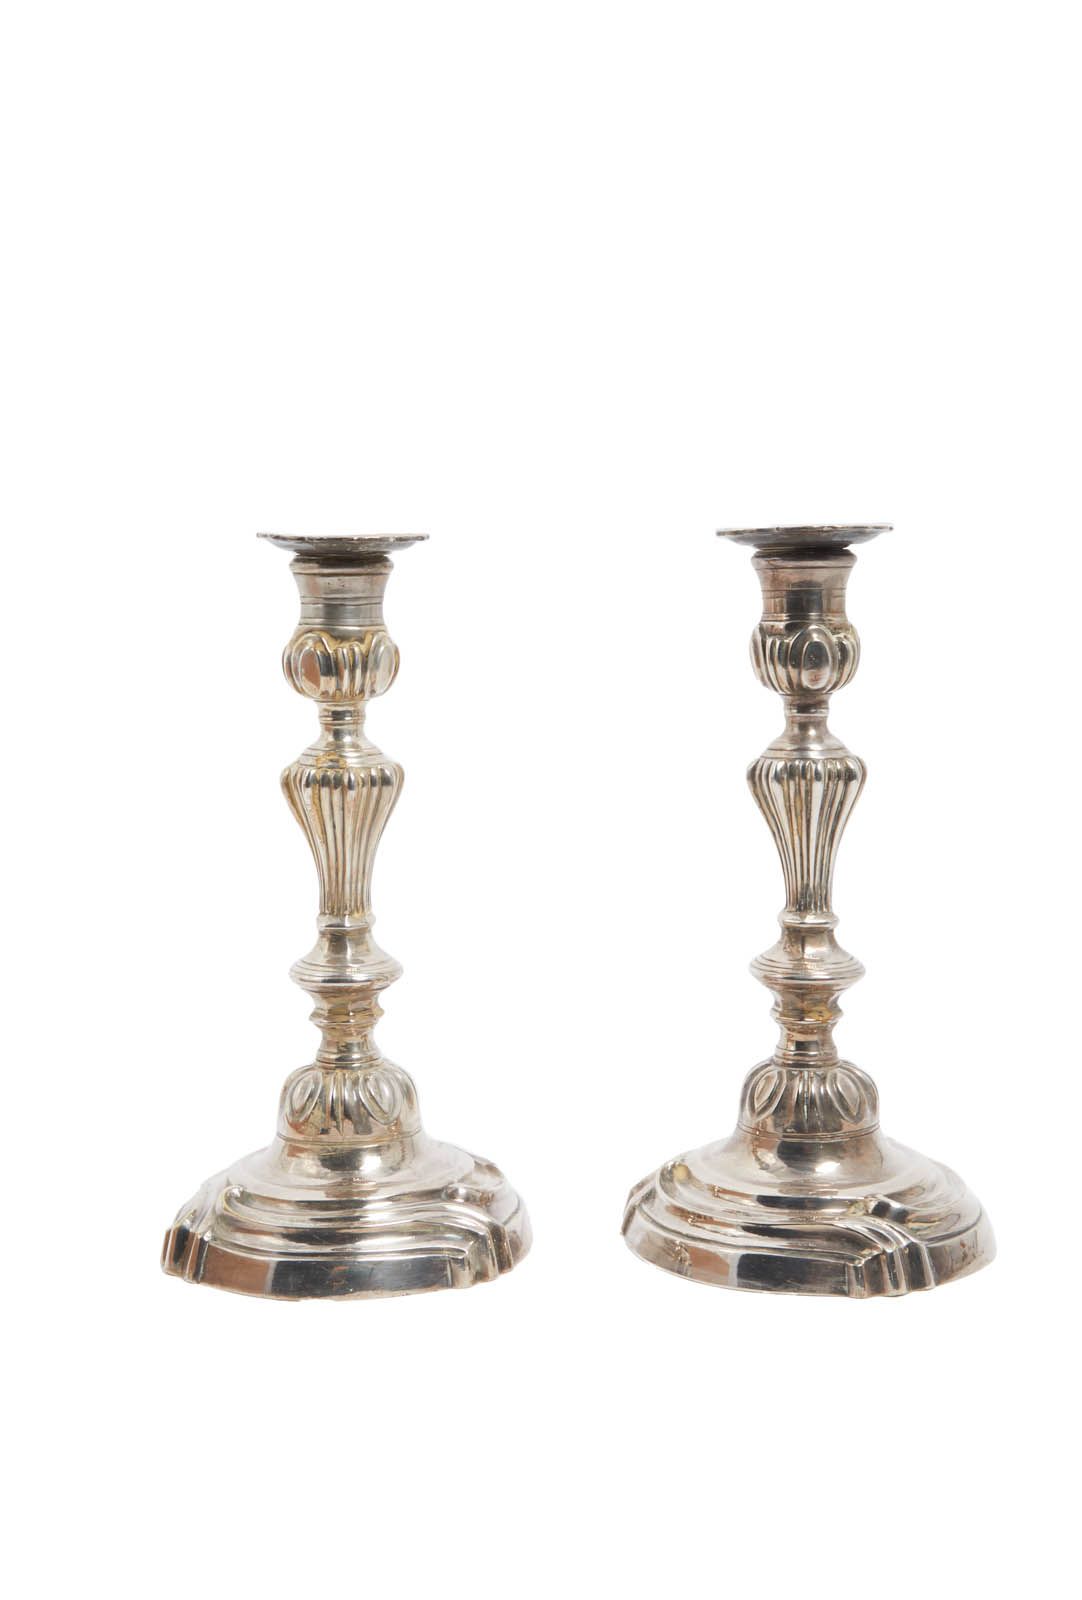 Null 18- Pair of rocaille style candlesticks in silvered bronze.
Height 26cm.